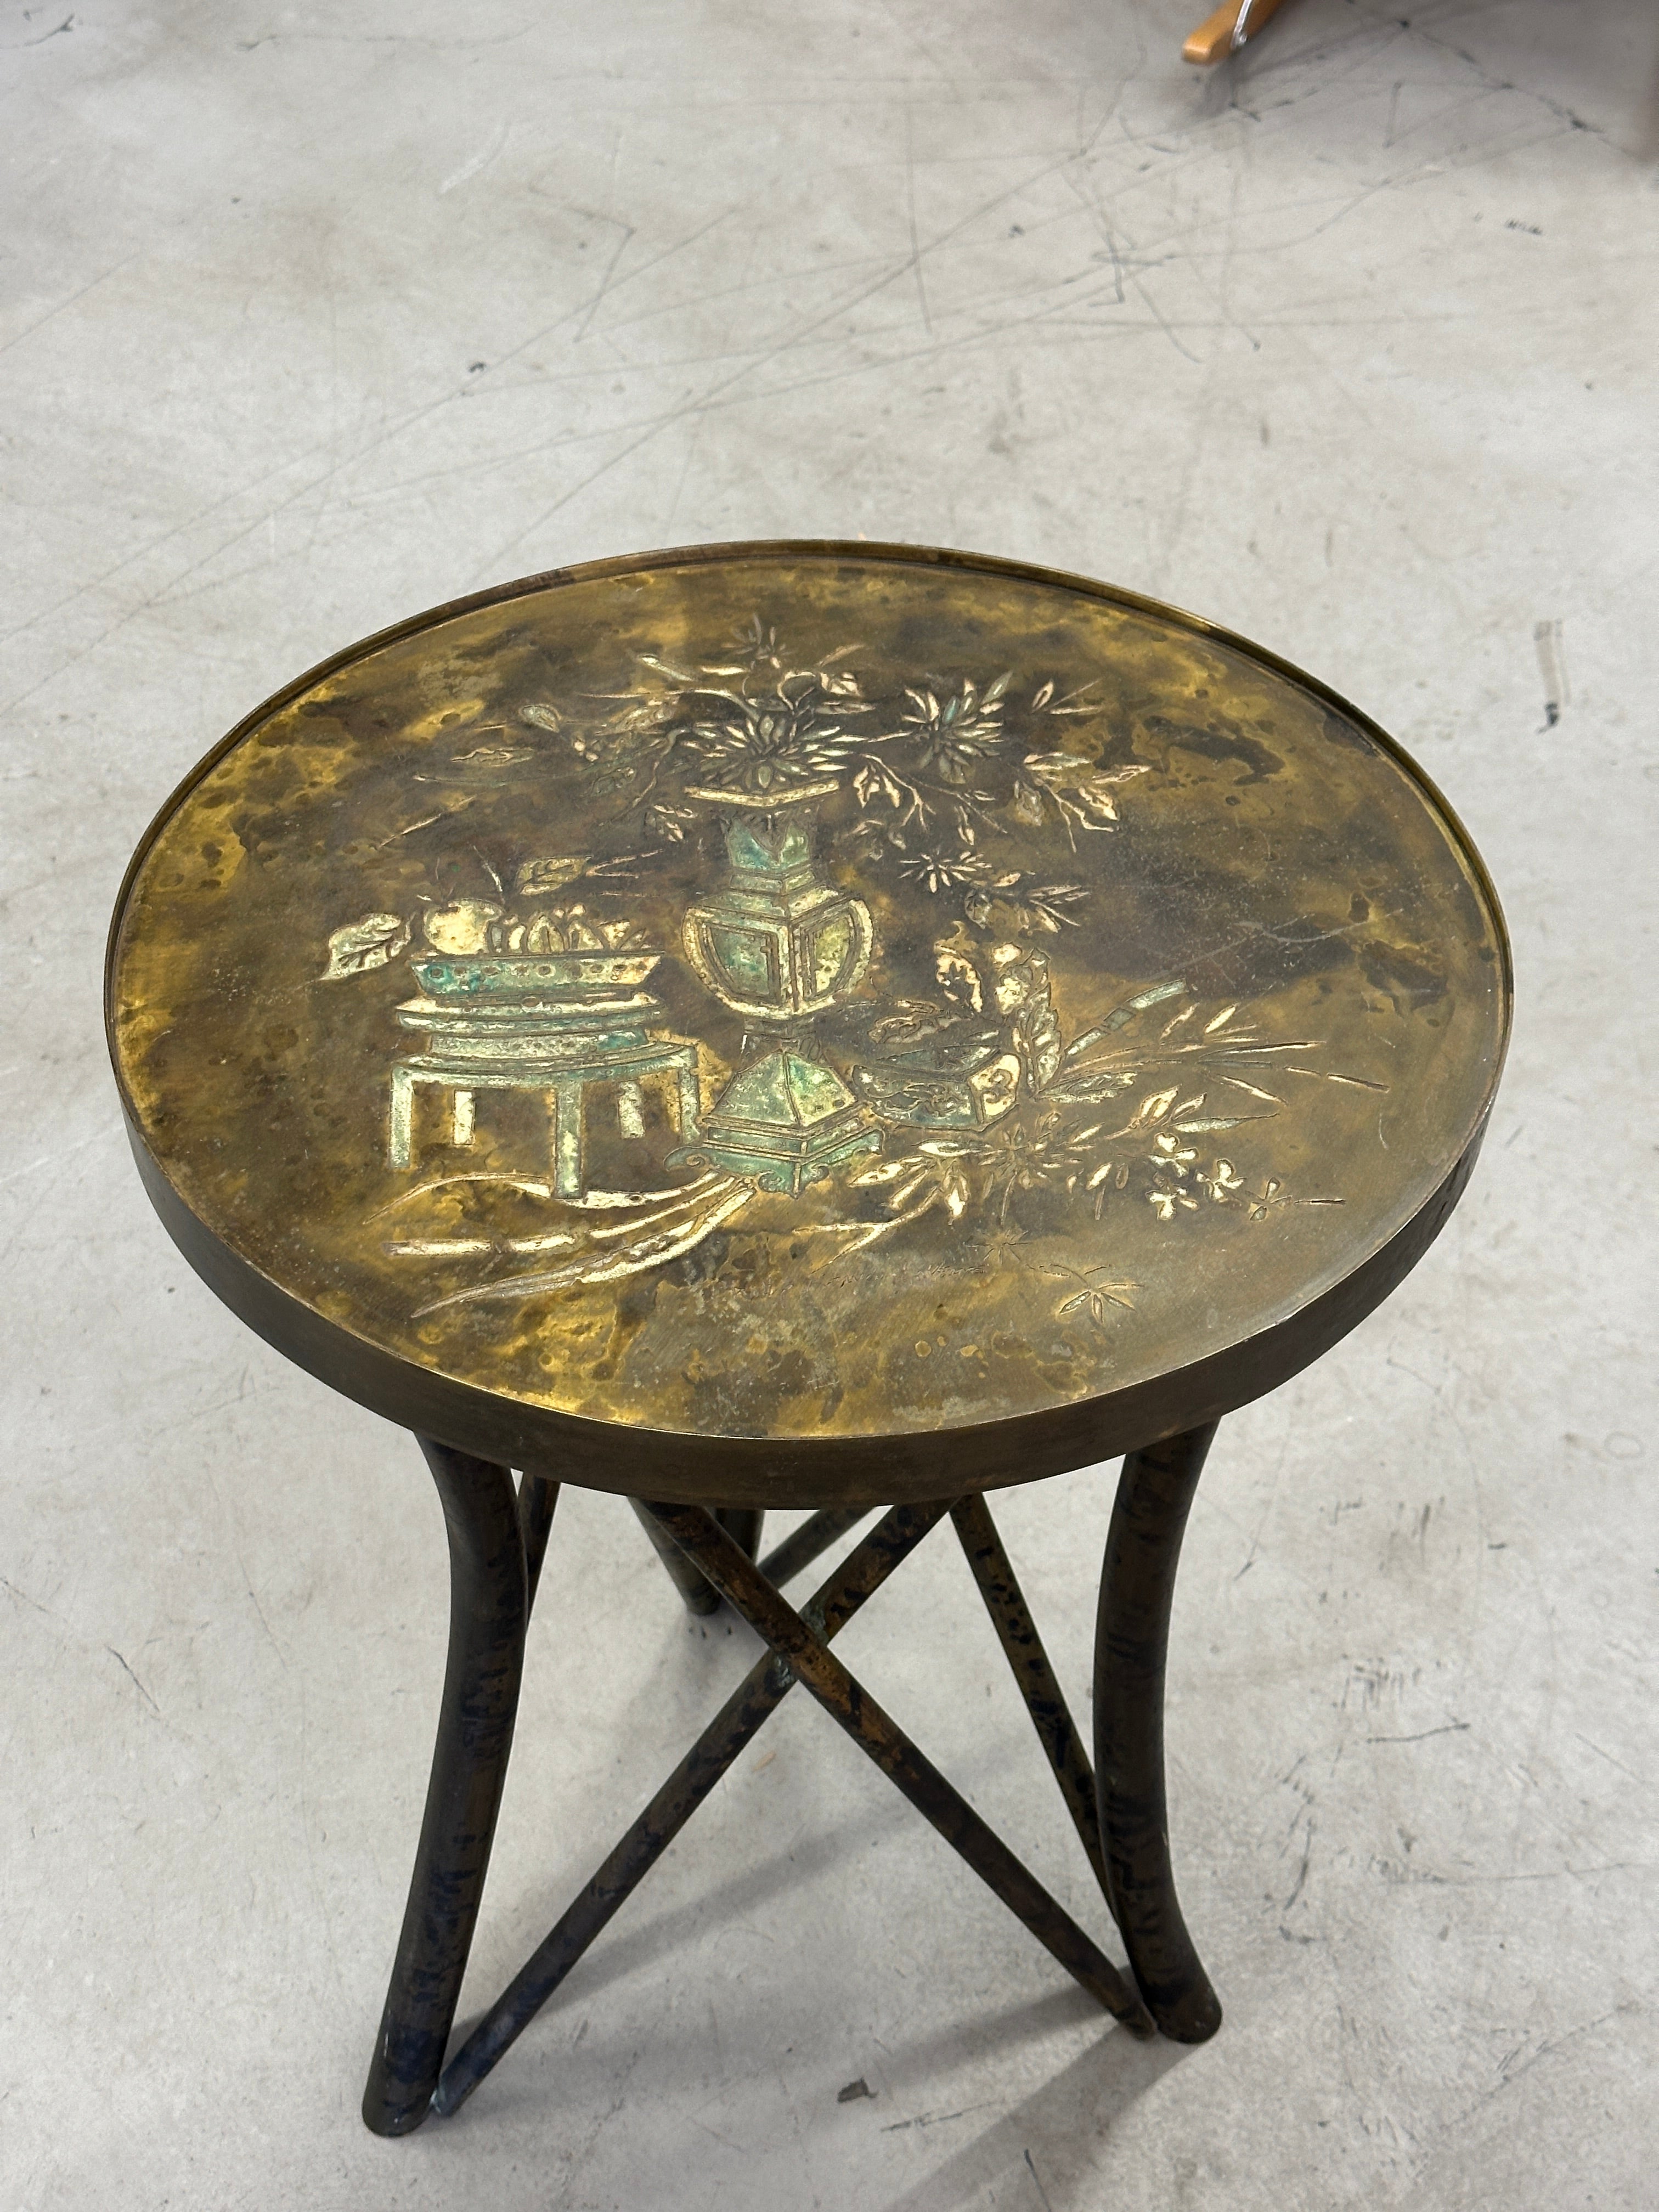 A beautiful and unusual example of an acid etched table by Philip and Kelvin LaVerne. This diminutive beauty has a floral motif and beautiful patina. It’s held up by tubular legs. In good condition with a small bend to a spot on the rim, pictured.